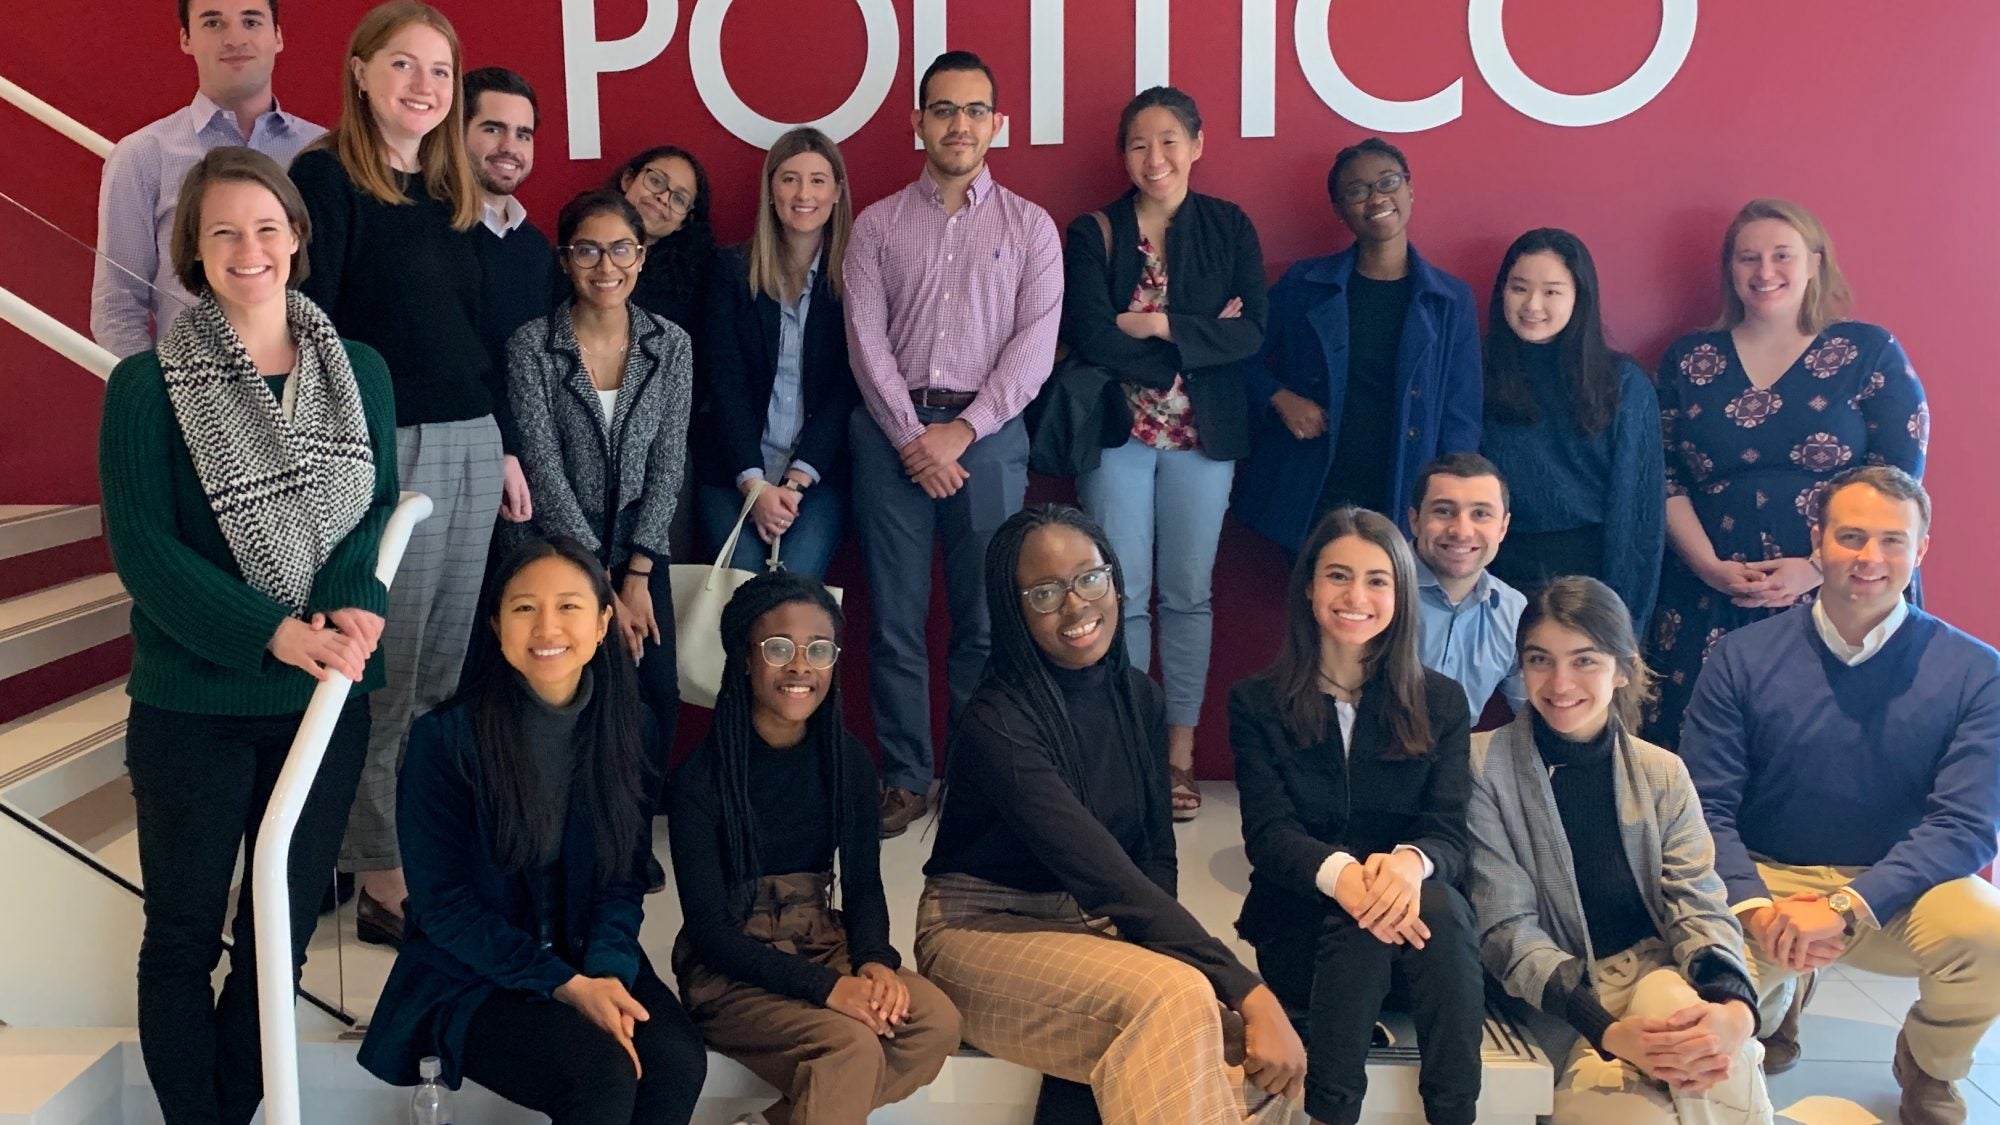 Students smile for photo in front of &quot;Politico&quot; sign.